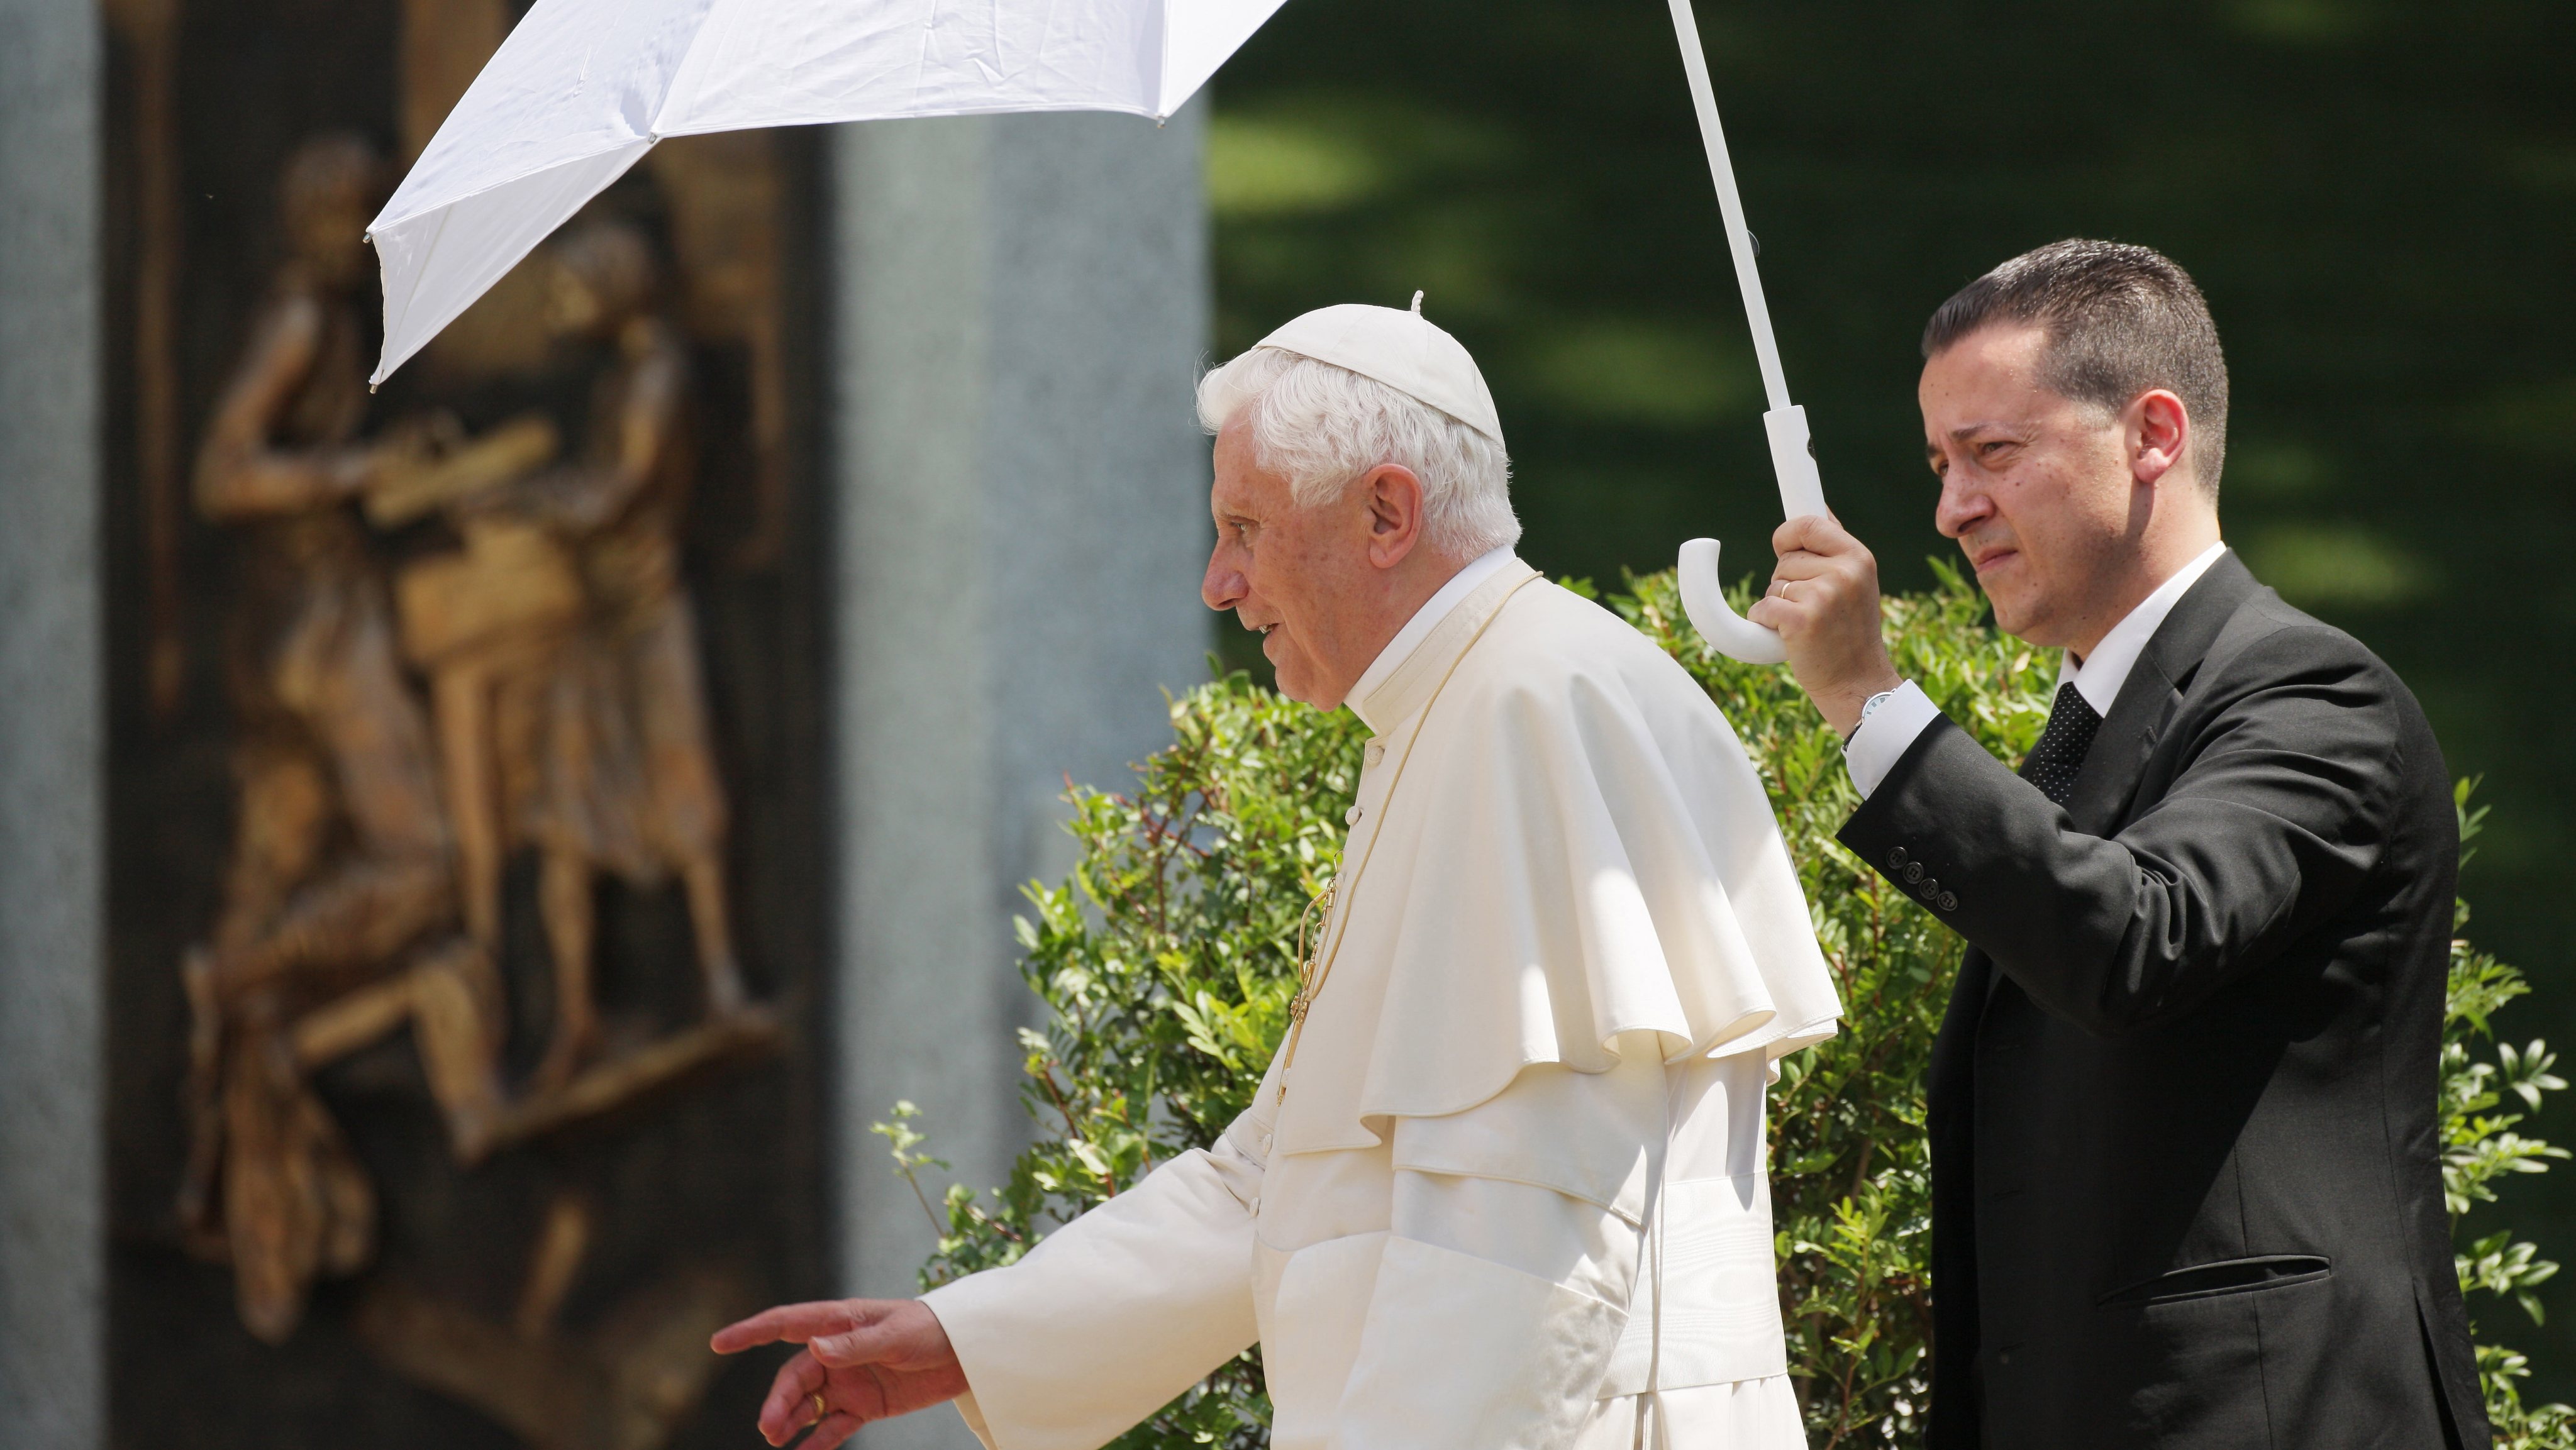 Pope Benedict XVI and Paolo Gabriele